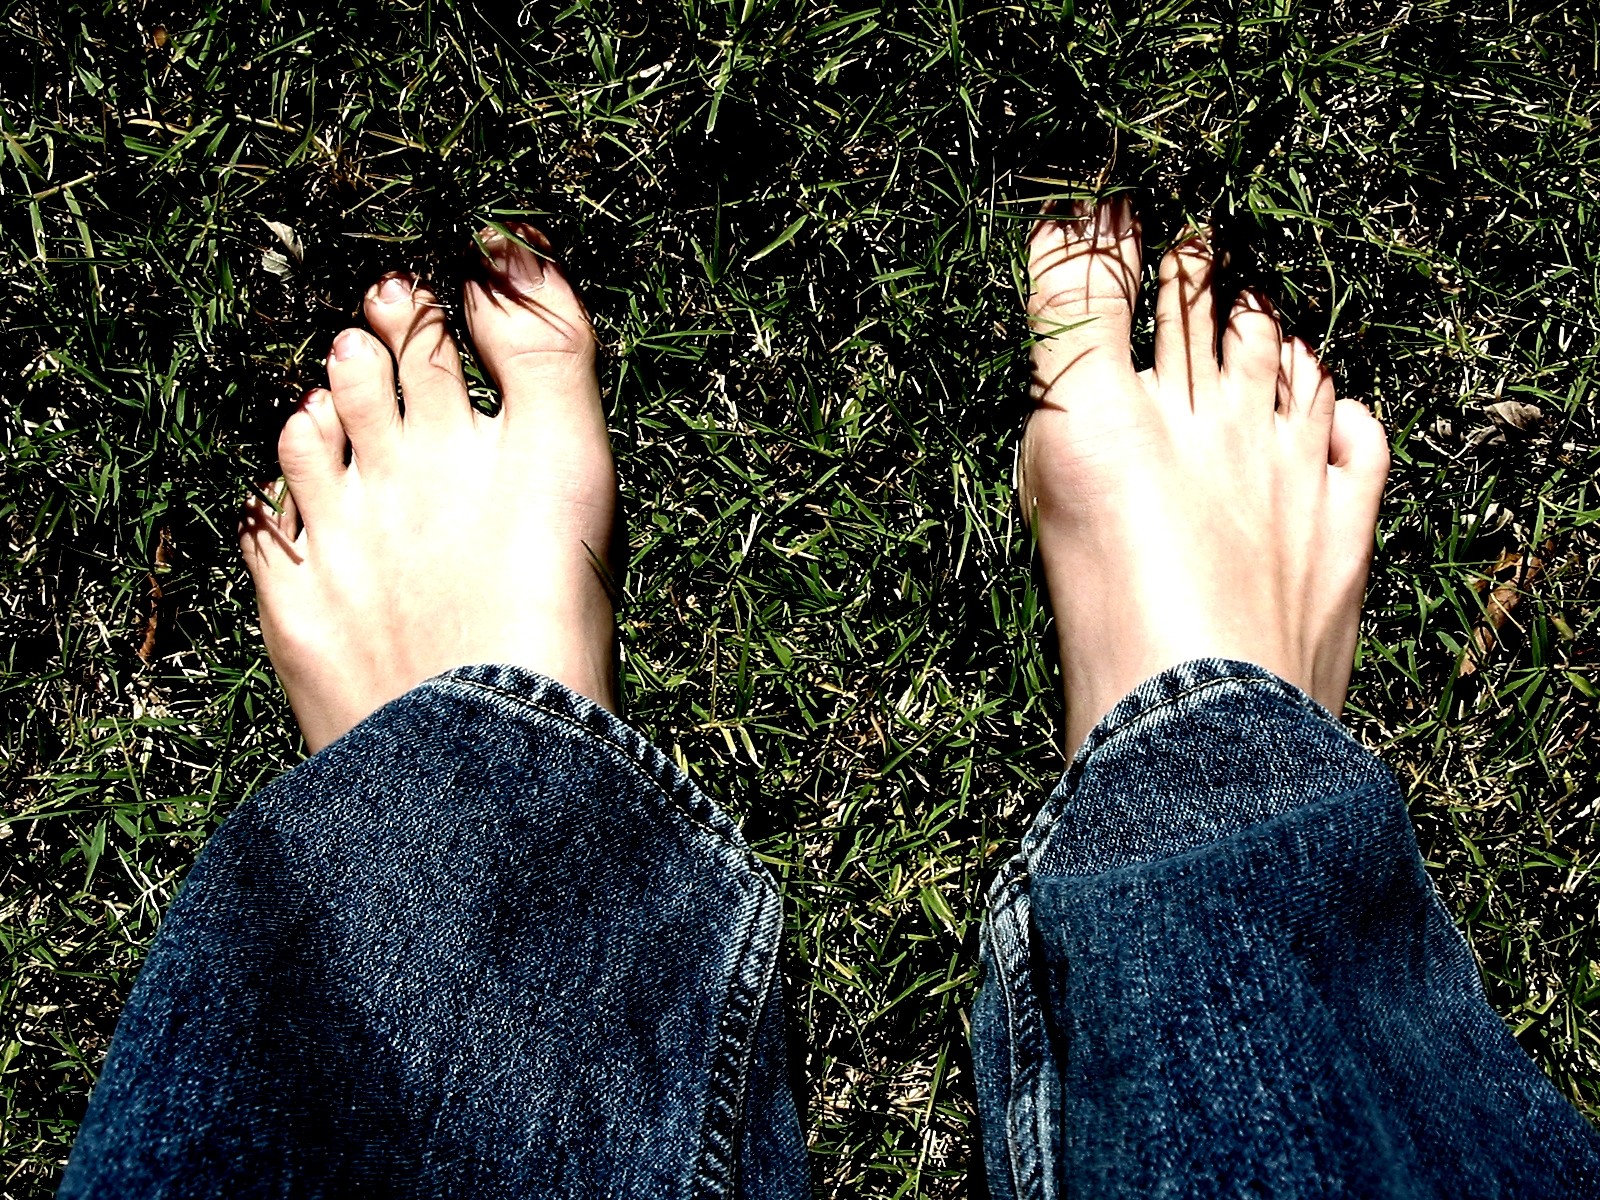 the legs and feet of a person in black jeans